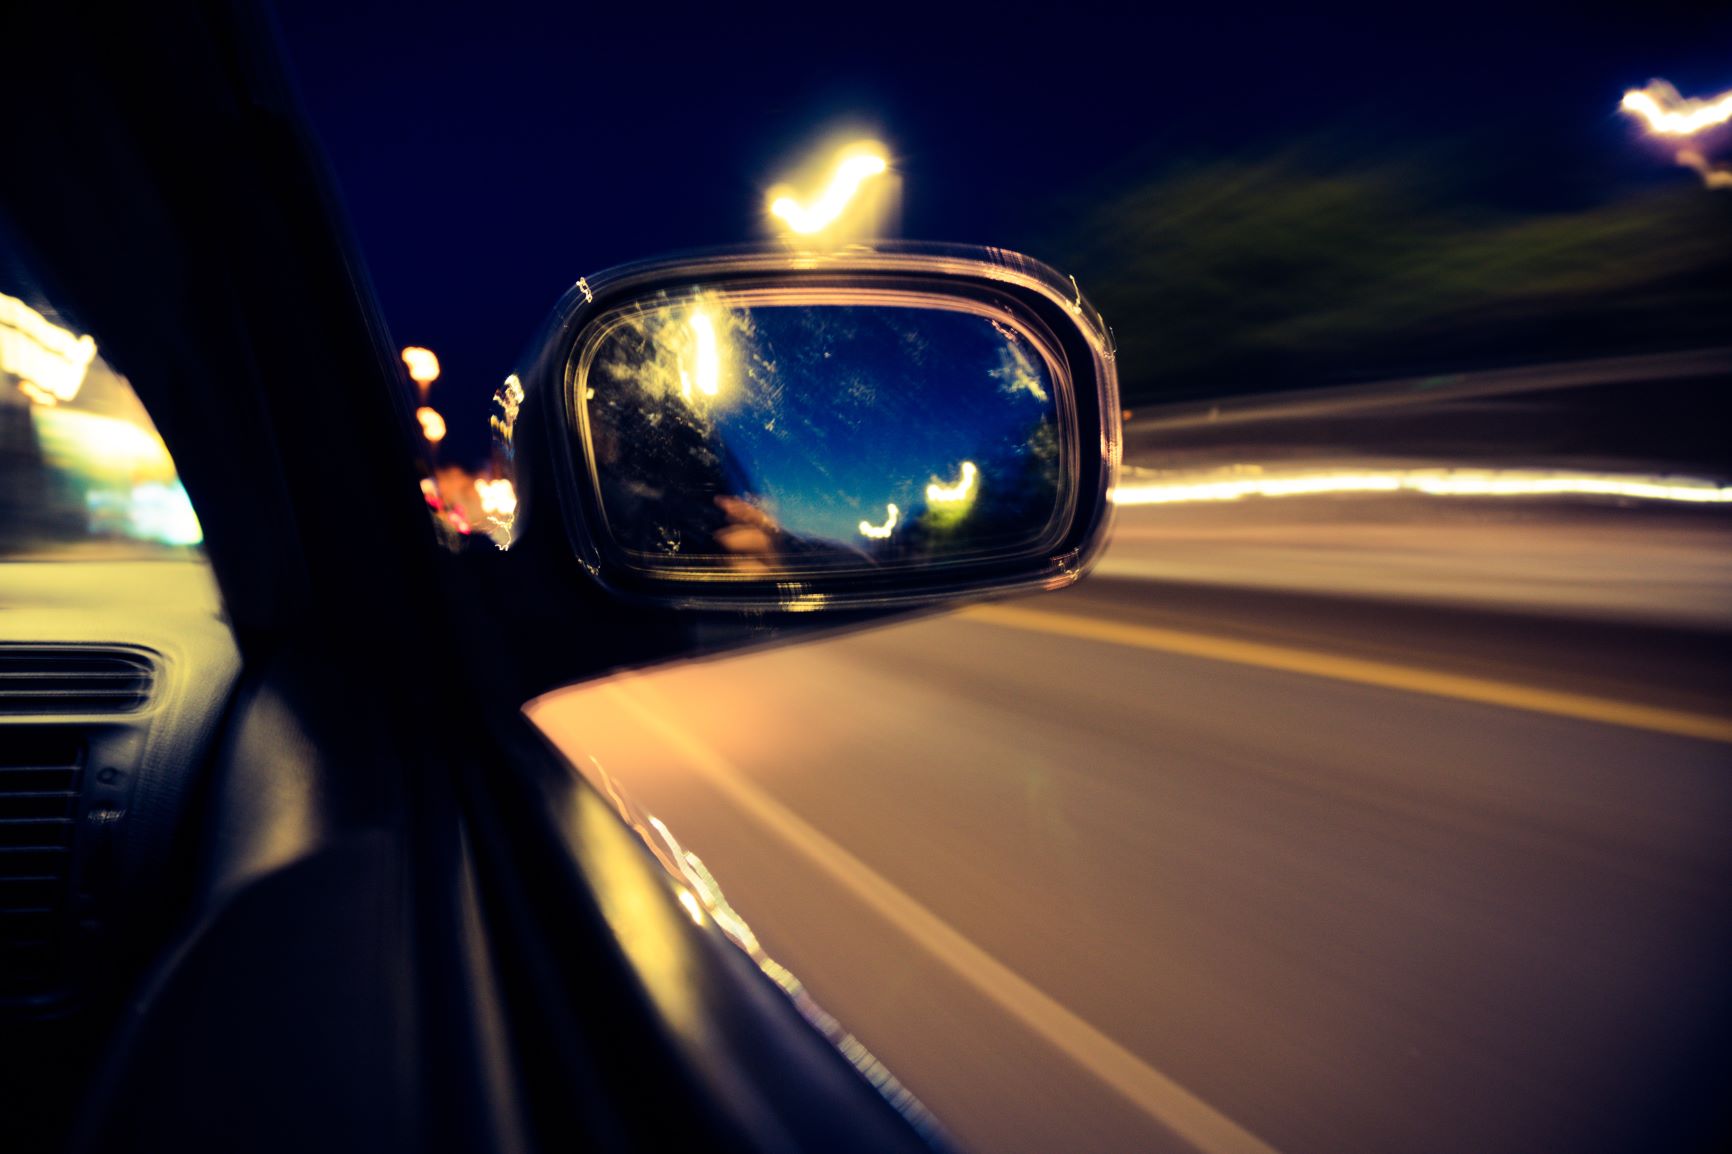 How To Help Your Eyesight While Driving At Night